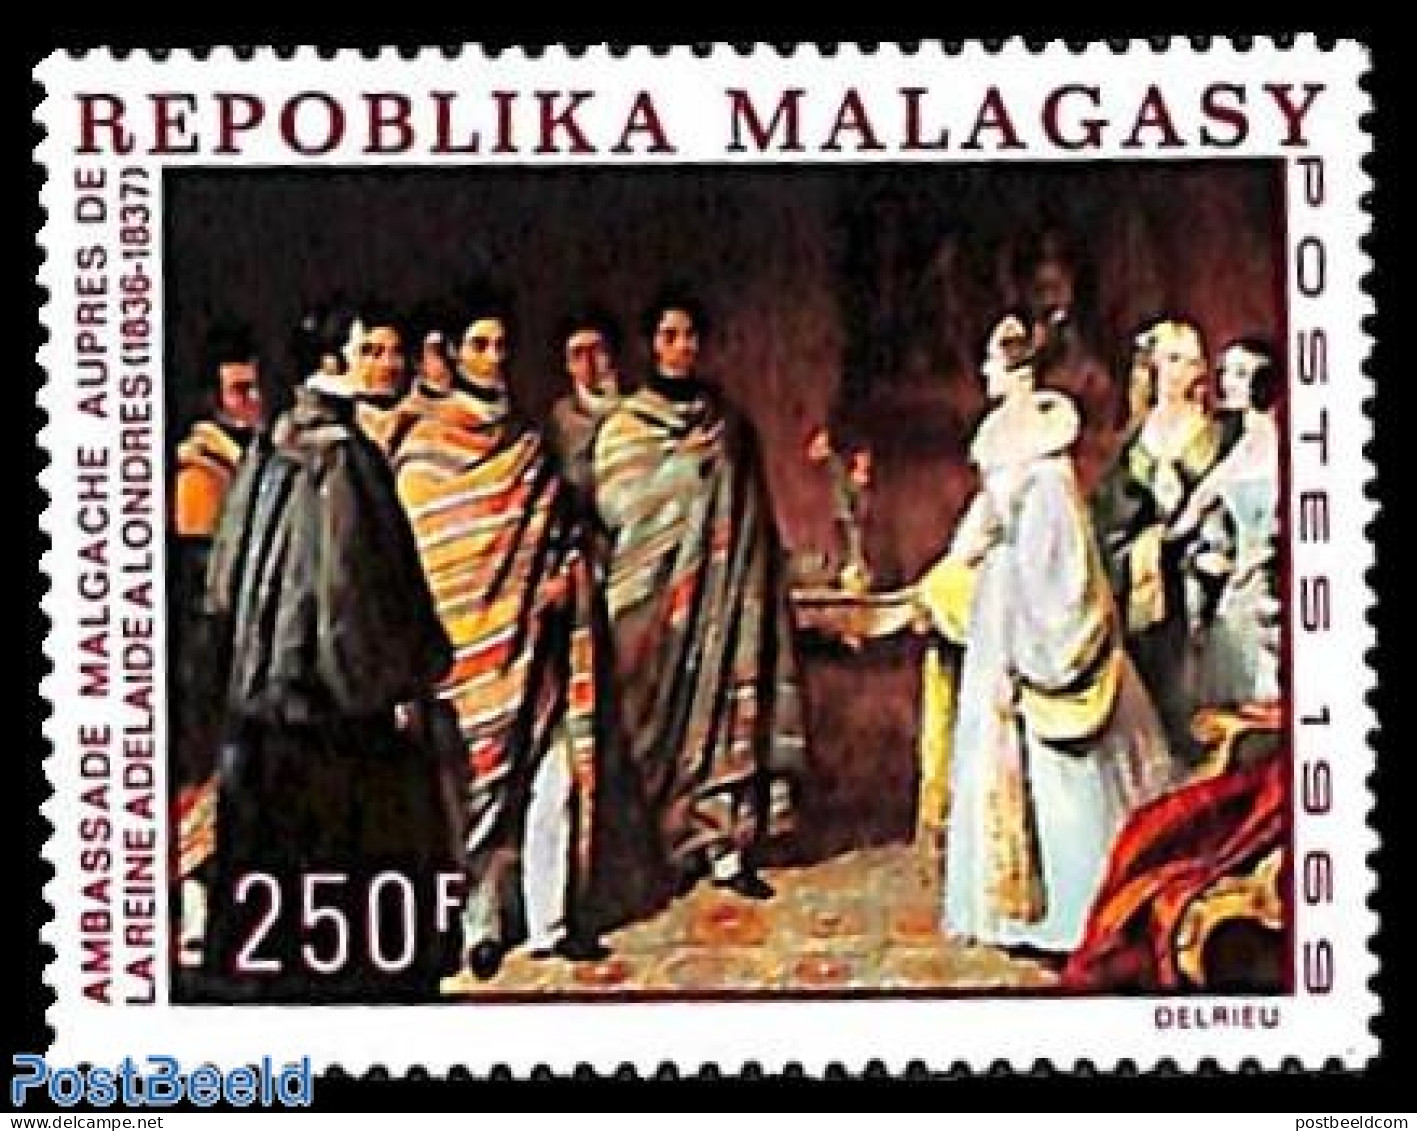 Madagascar 1969 Painting 1v, Mint NH, History - History - Kings & Queens (Royalty) - Art - Paintings - Familles Royales